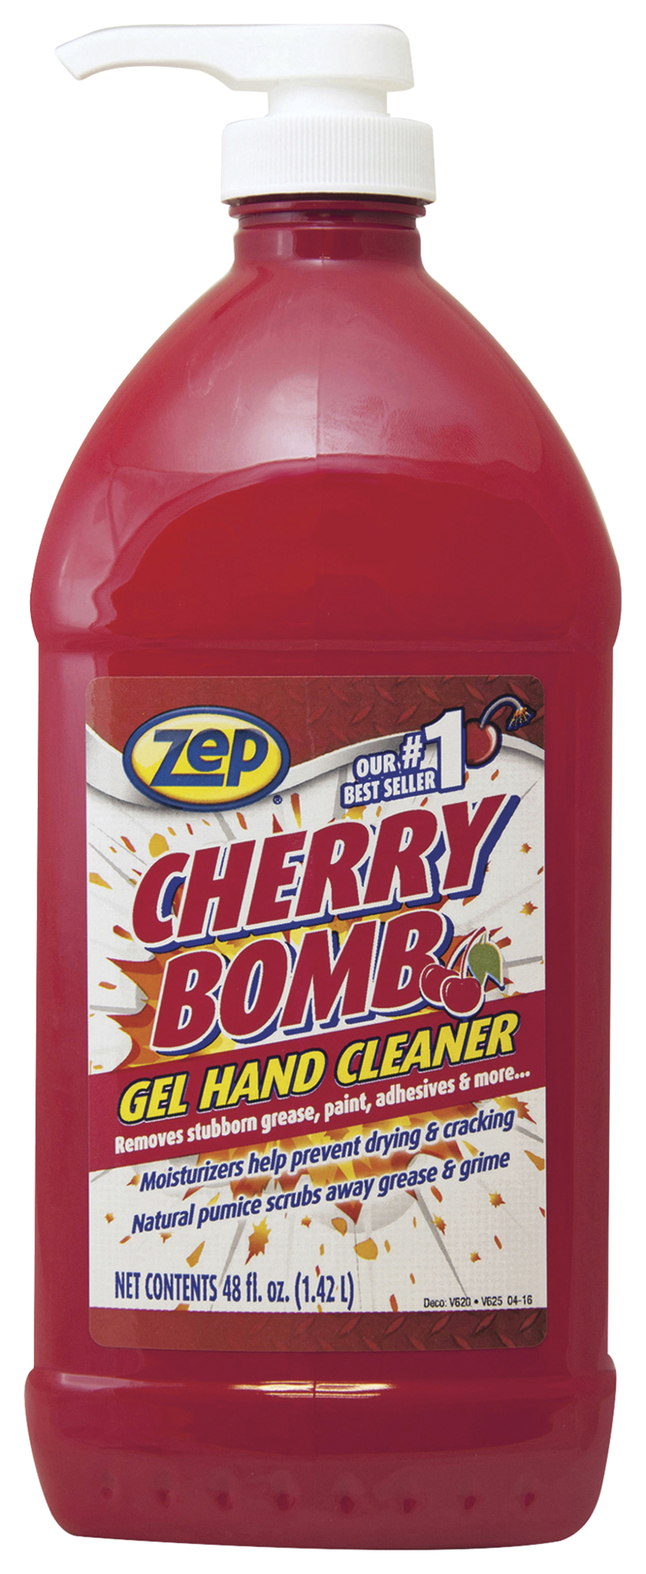 Zep Commercial Cherry Bomb Gel Hand Cleaner, 48 Fluid Ounces, Red, Item Number 2024384